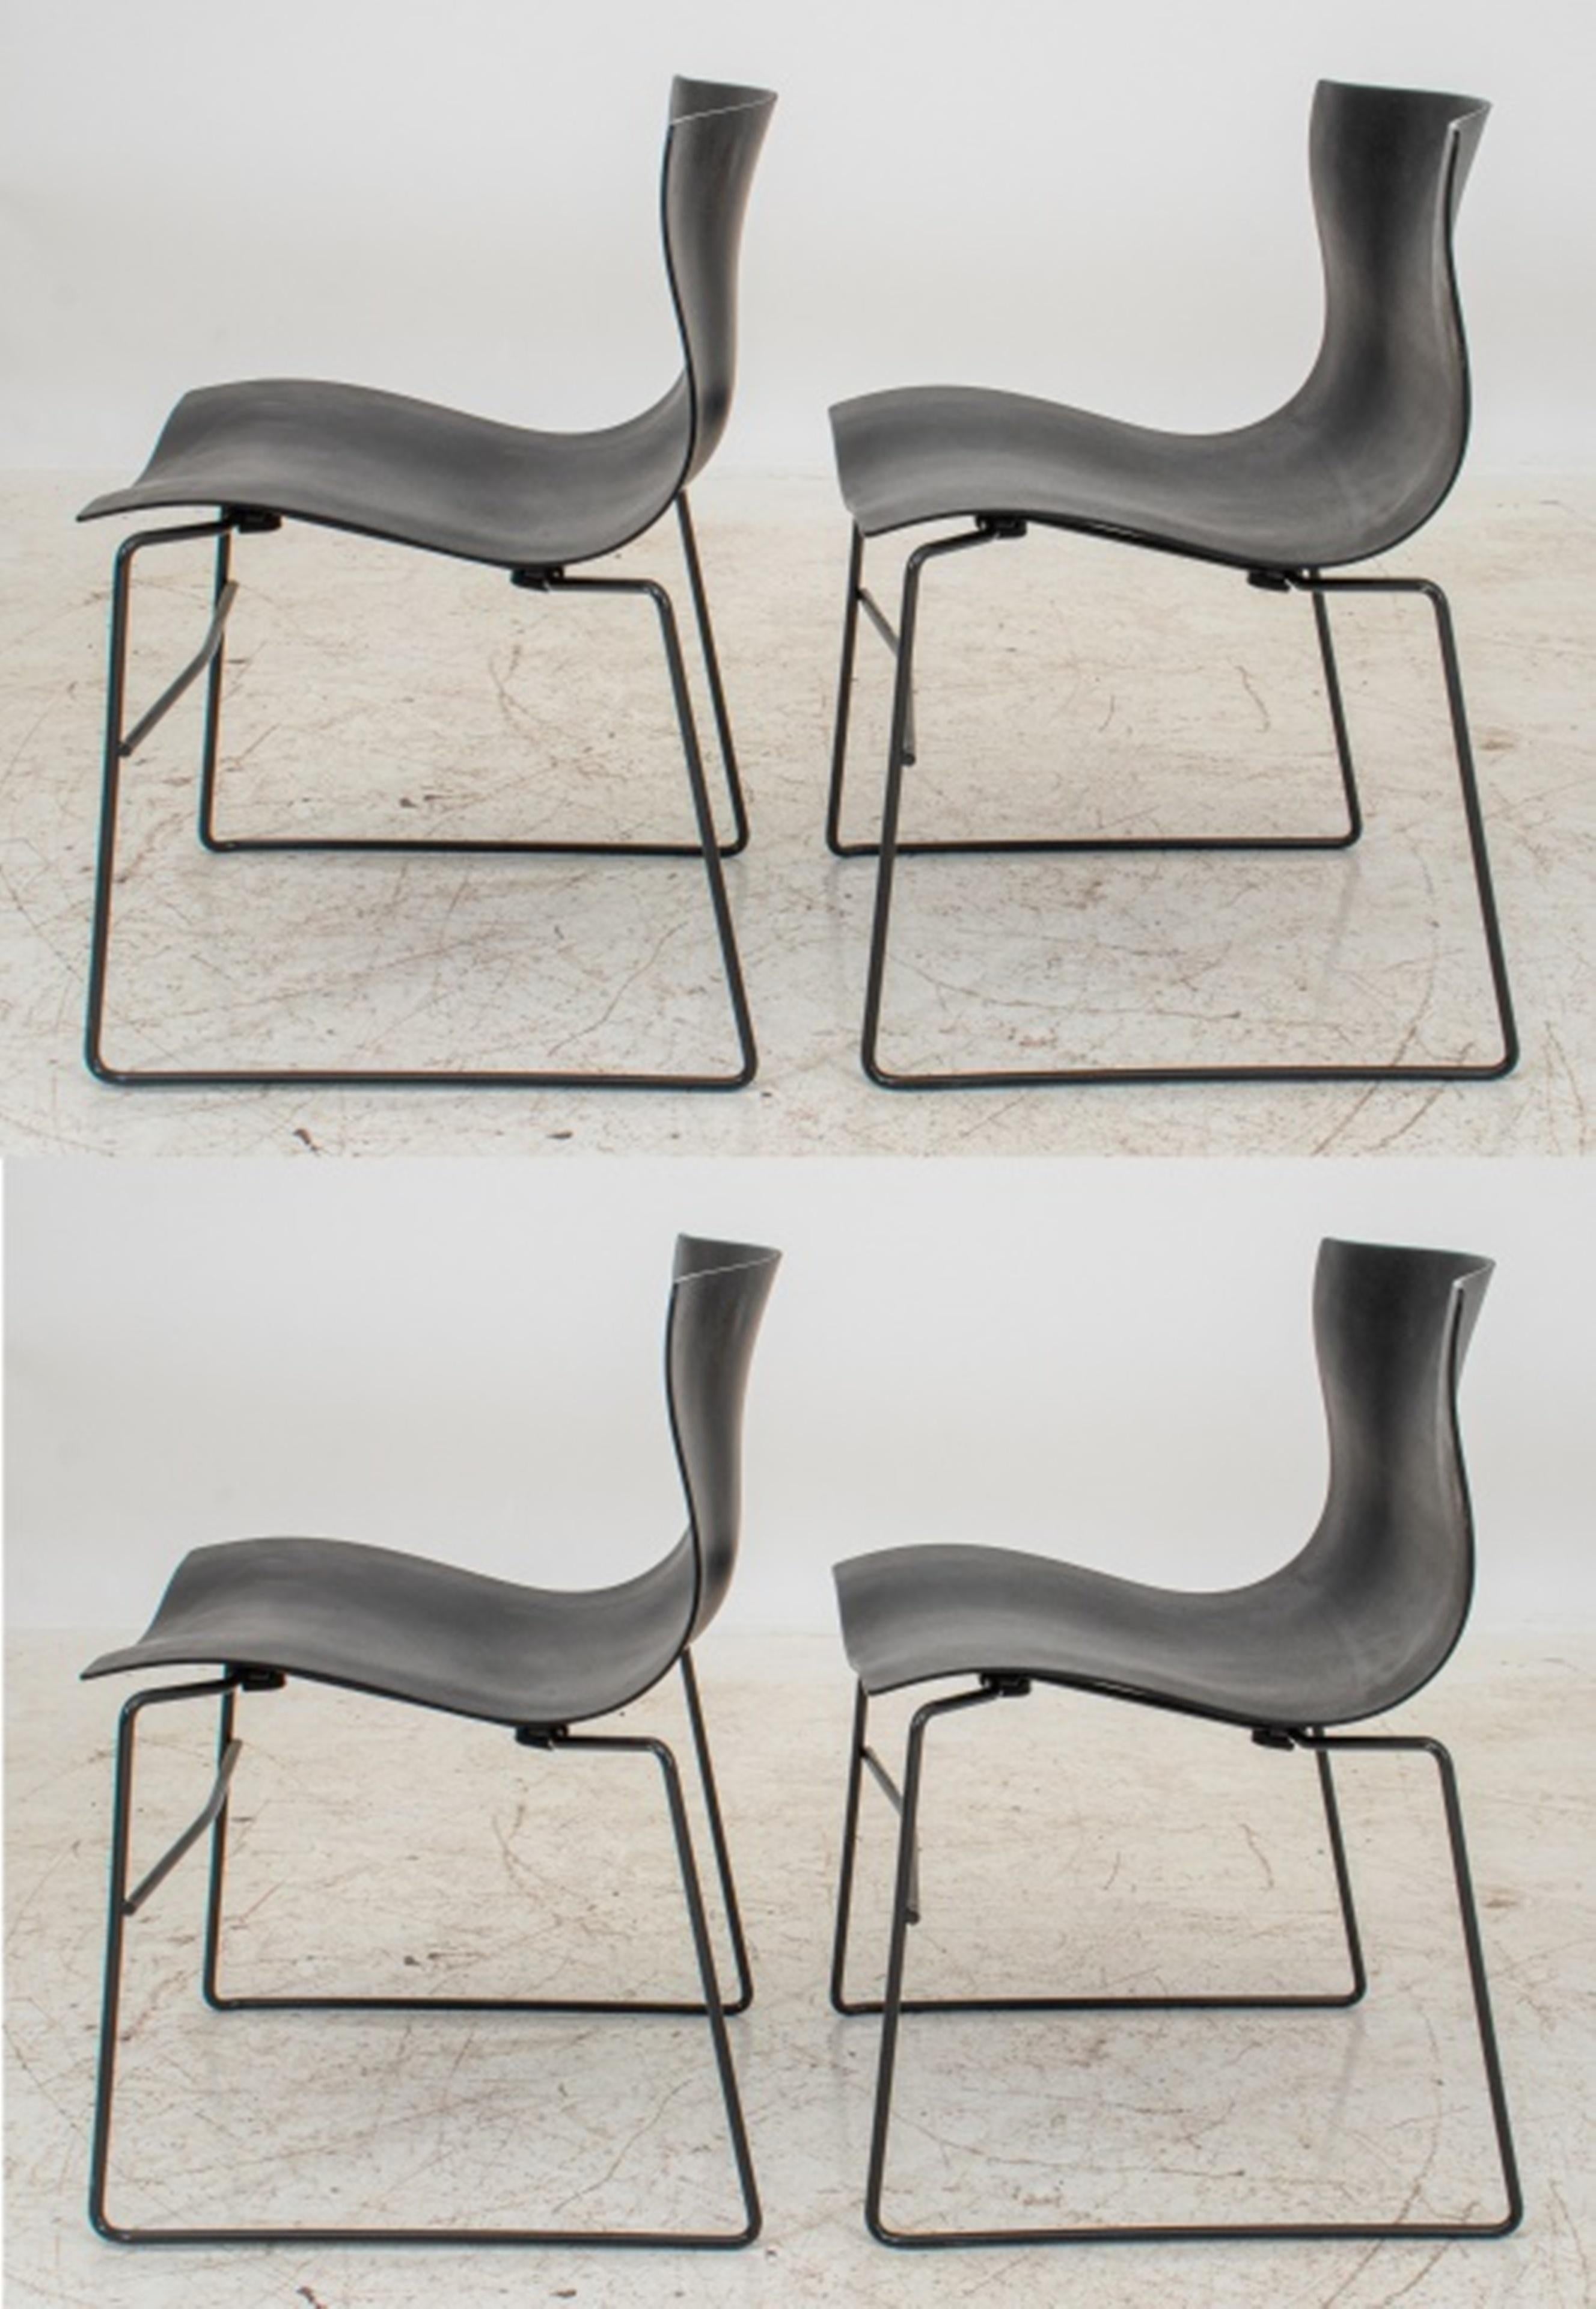 Massimo Vignelli (Italian 1931 -2014) for Knoll, four (4) stacking Handkerchief chairs (designed 1983) with fibreglass-reinforced polyester seats on black powdercoat aluminum frames. the underside of each chair with 